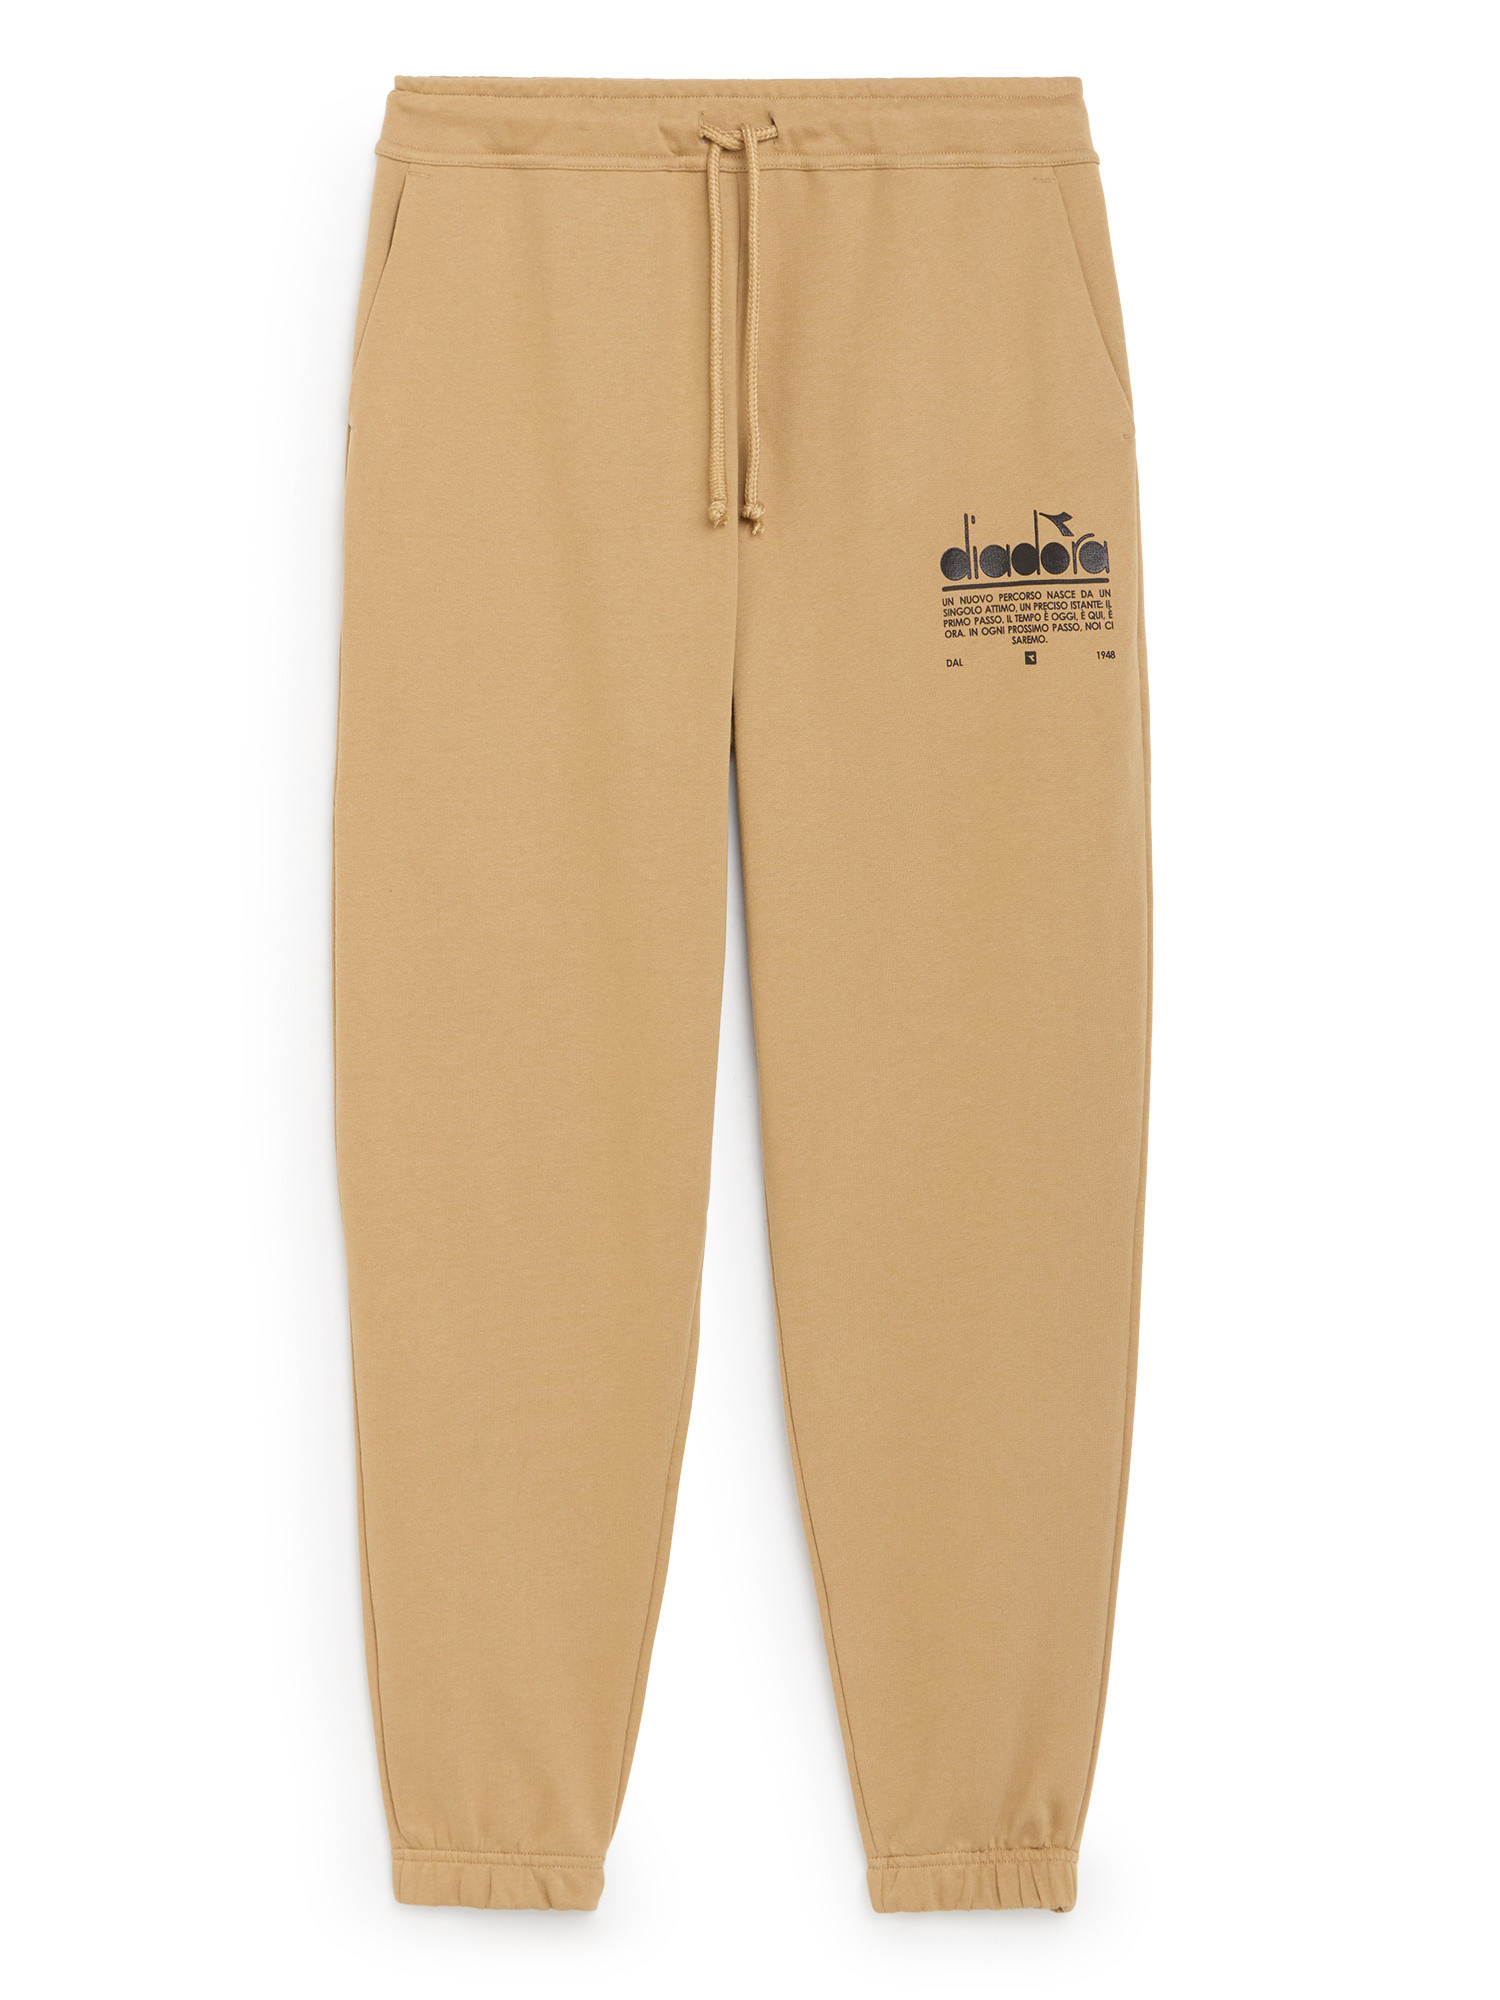 Diadora - Manifesto sports trousers with cotton print, Beige, large image number 0